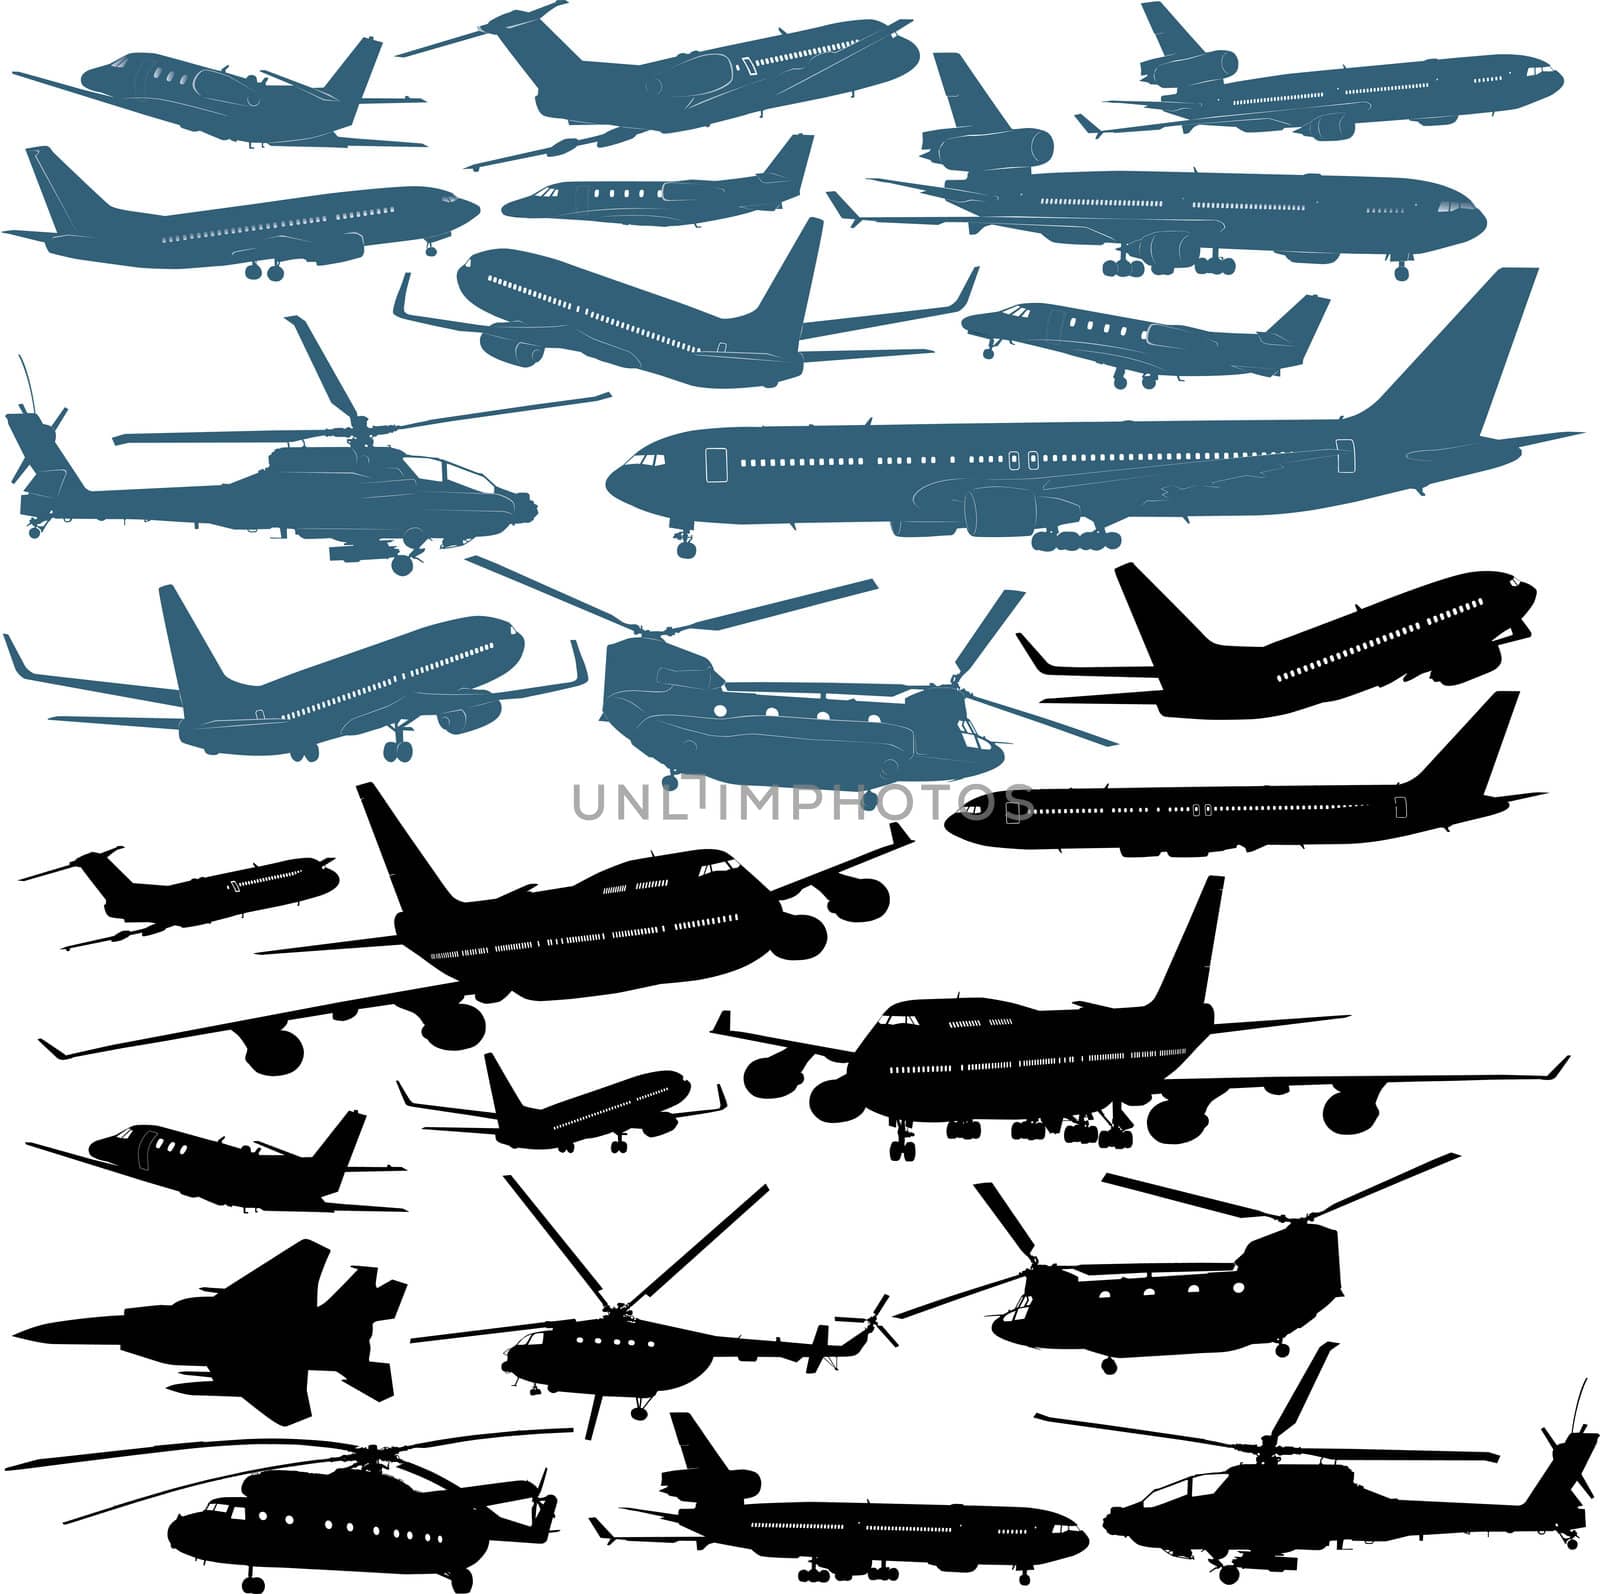 Illustrations of passenger airliners, millitary chopters